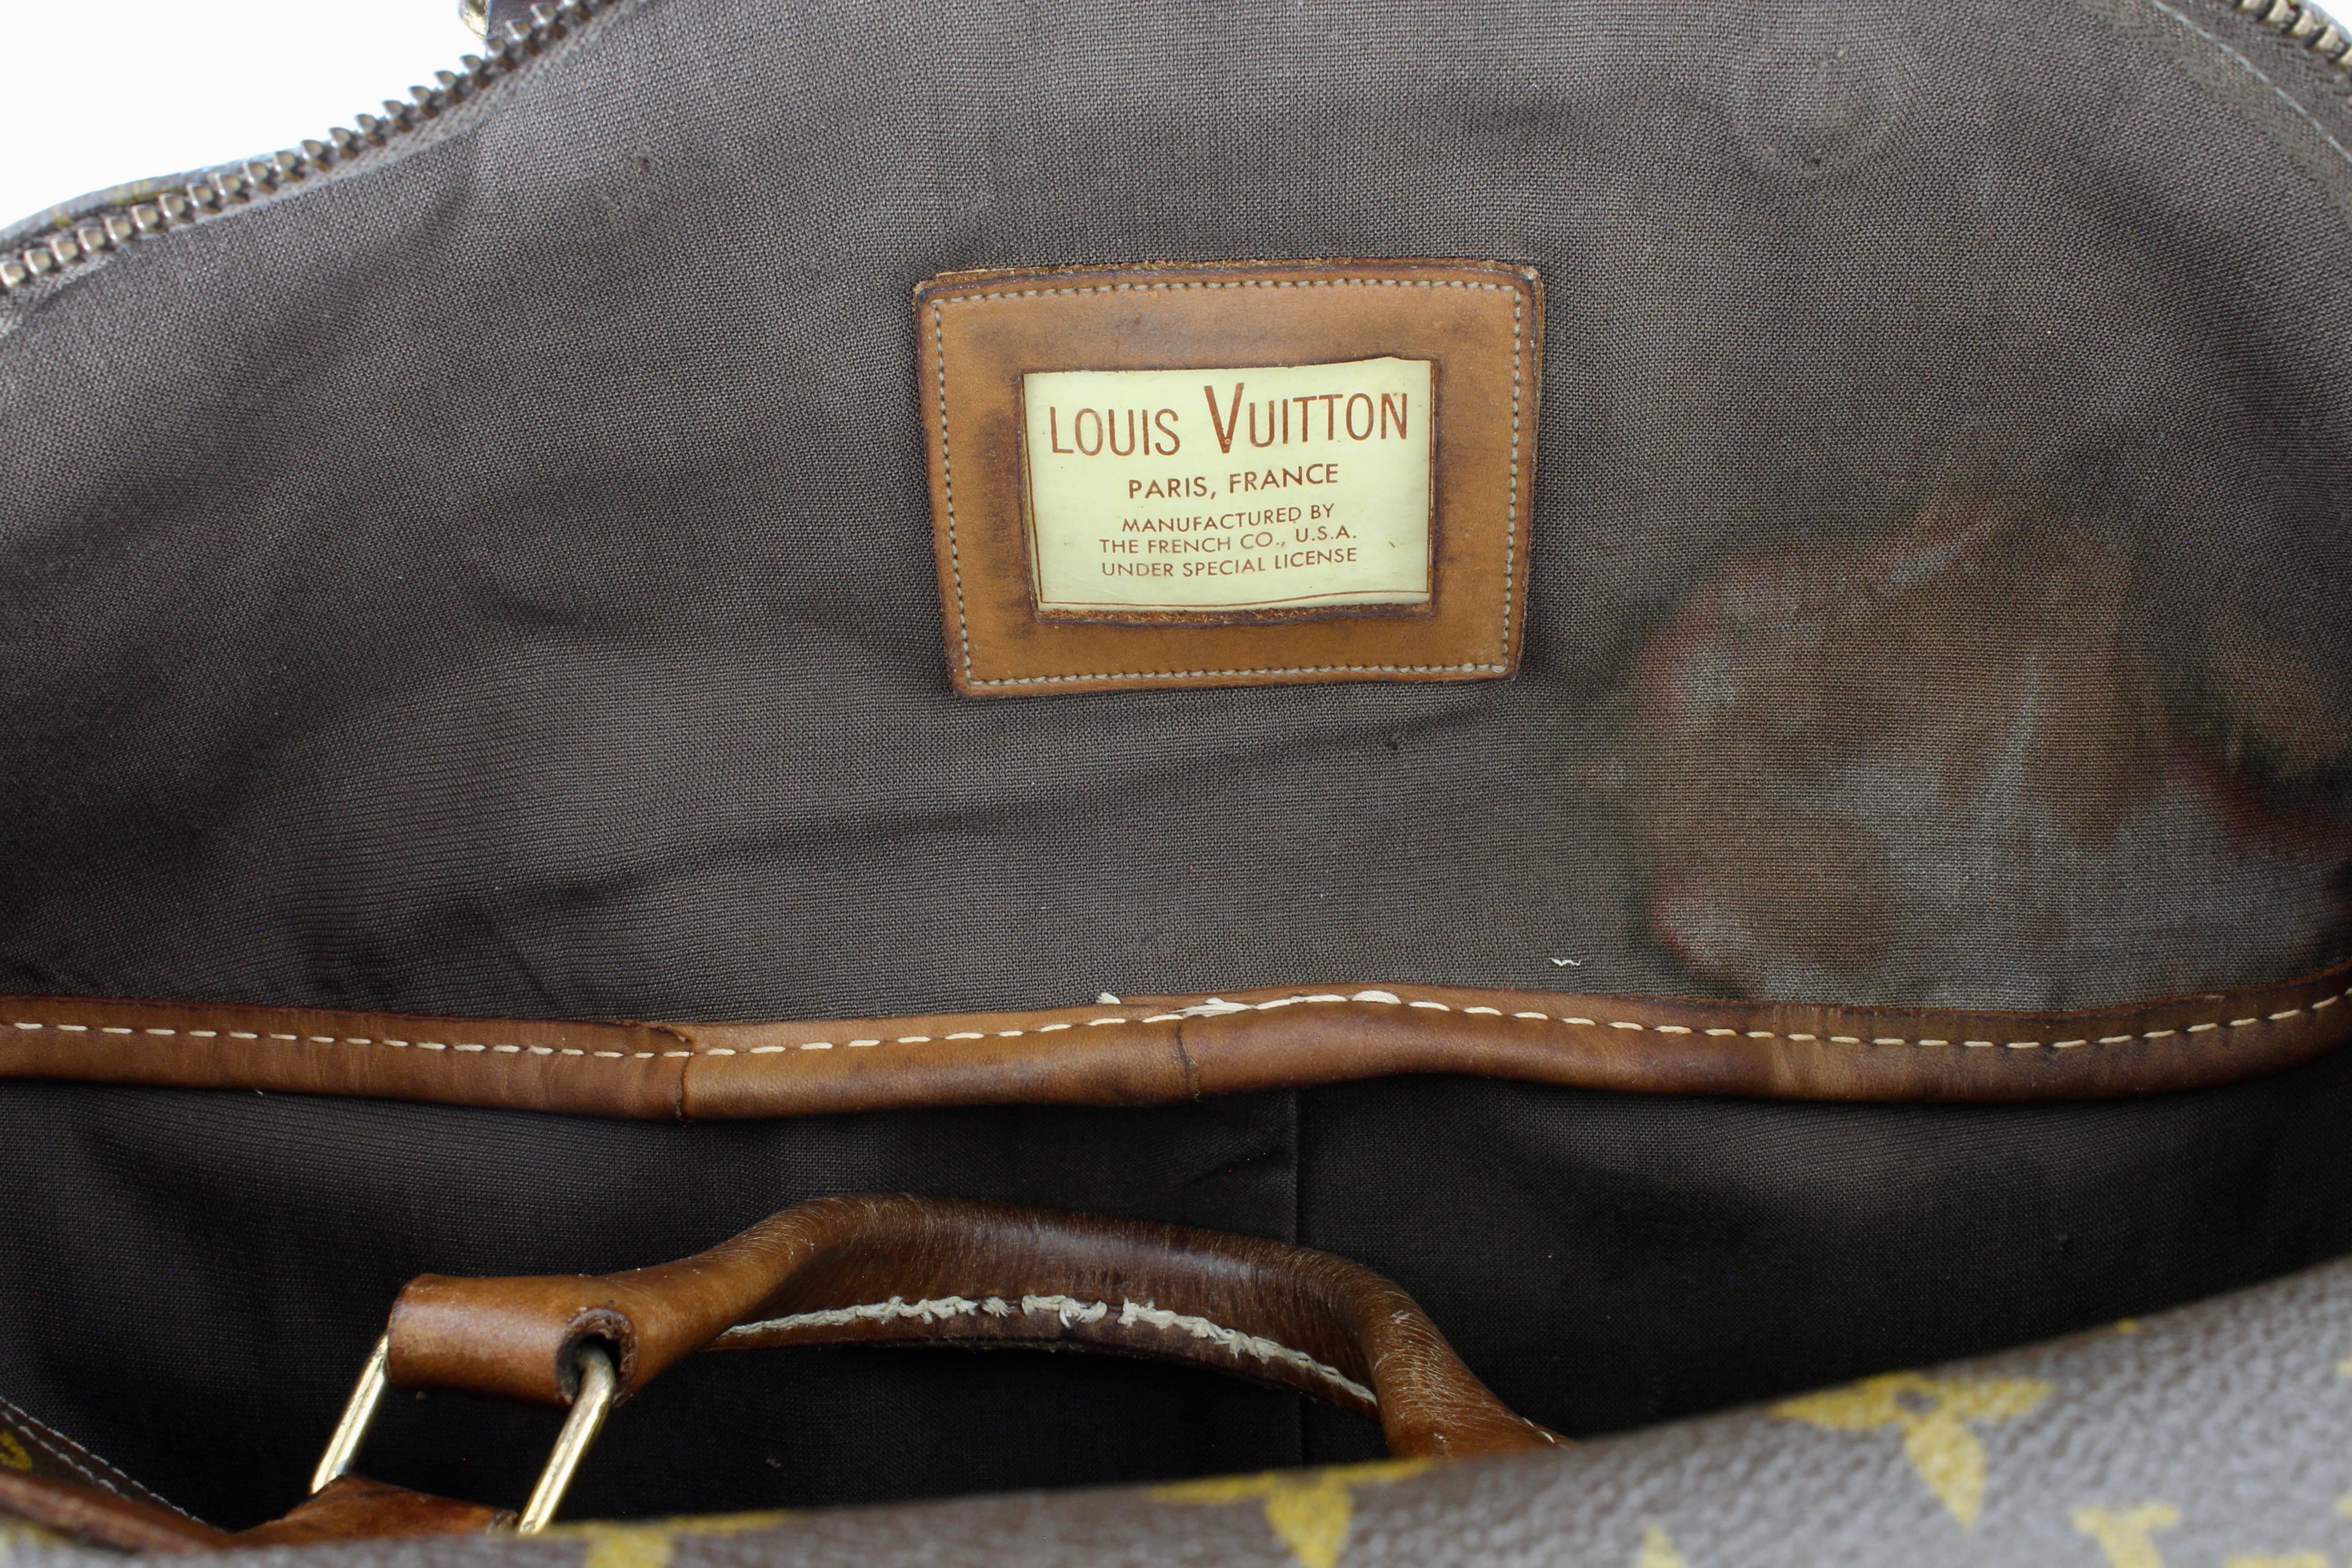 Louis Vuitton Large Steamer Bag Keepall Monogram Travel Tote French Company 70er Jahre 9